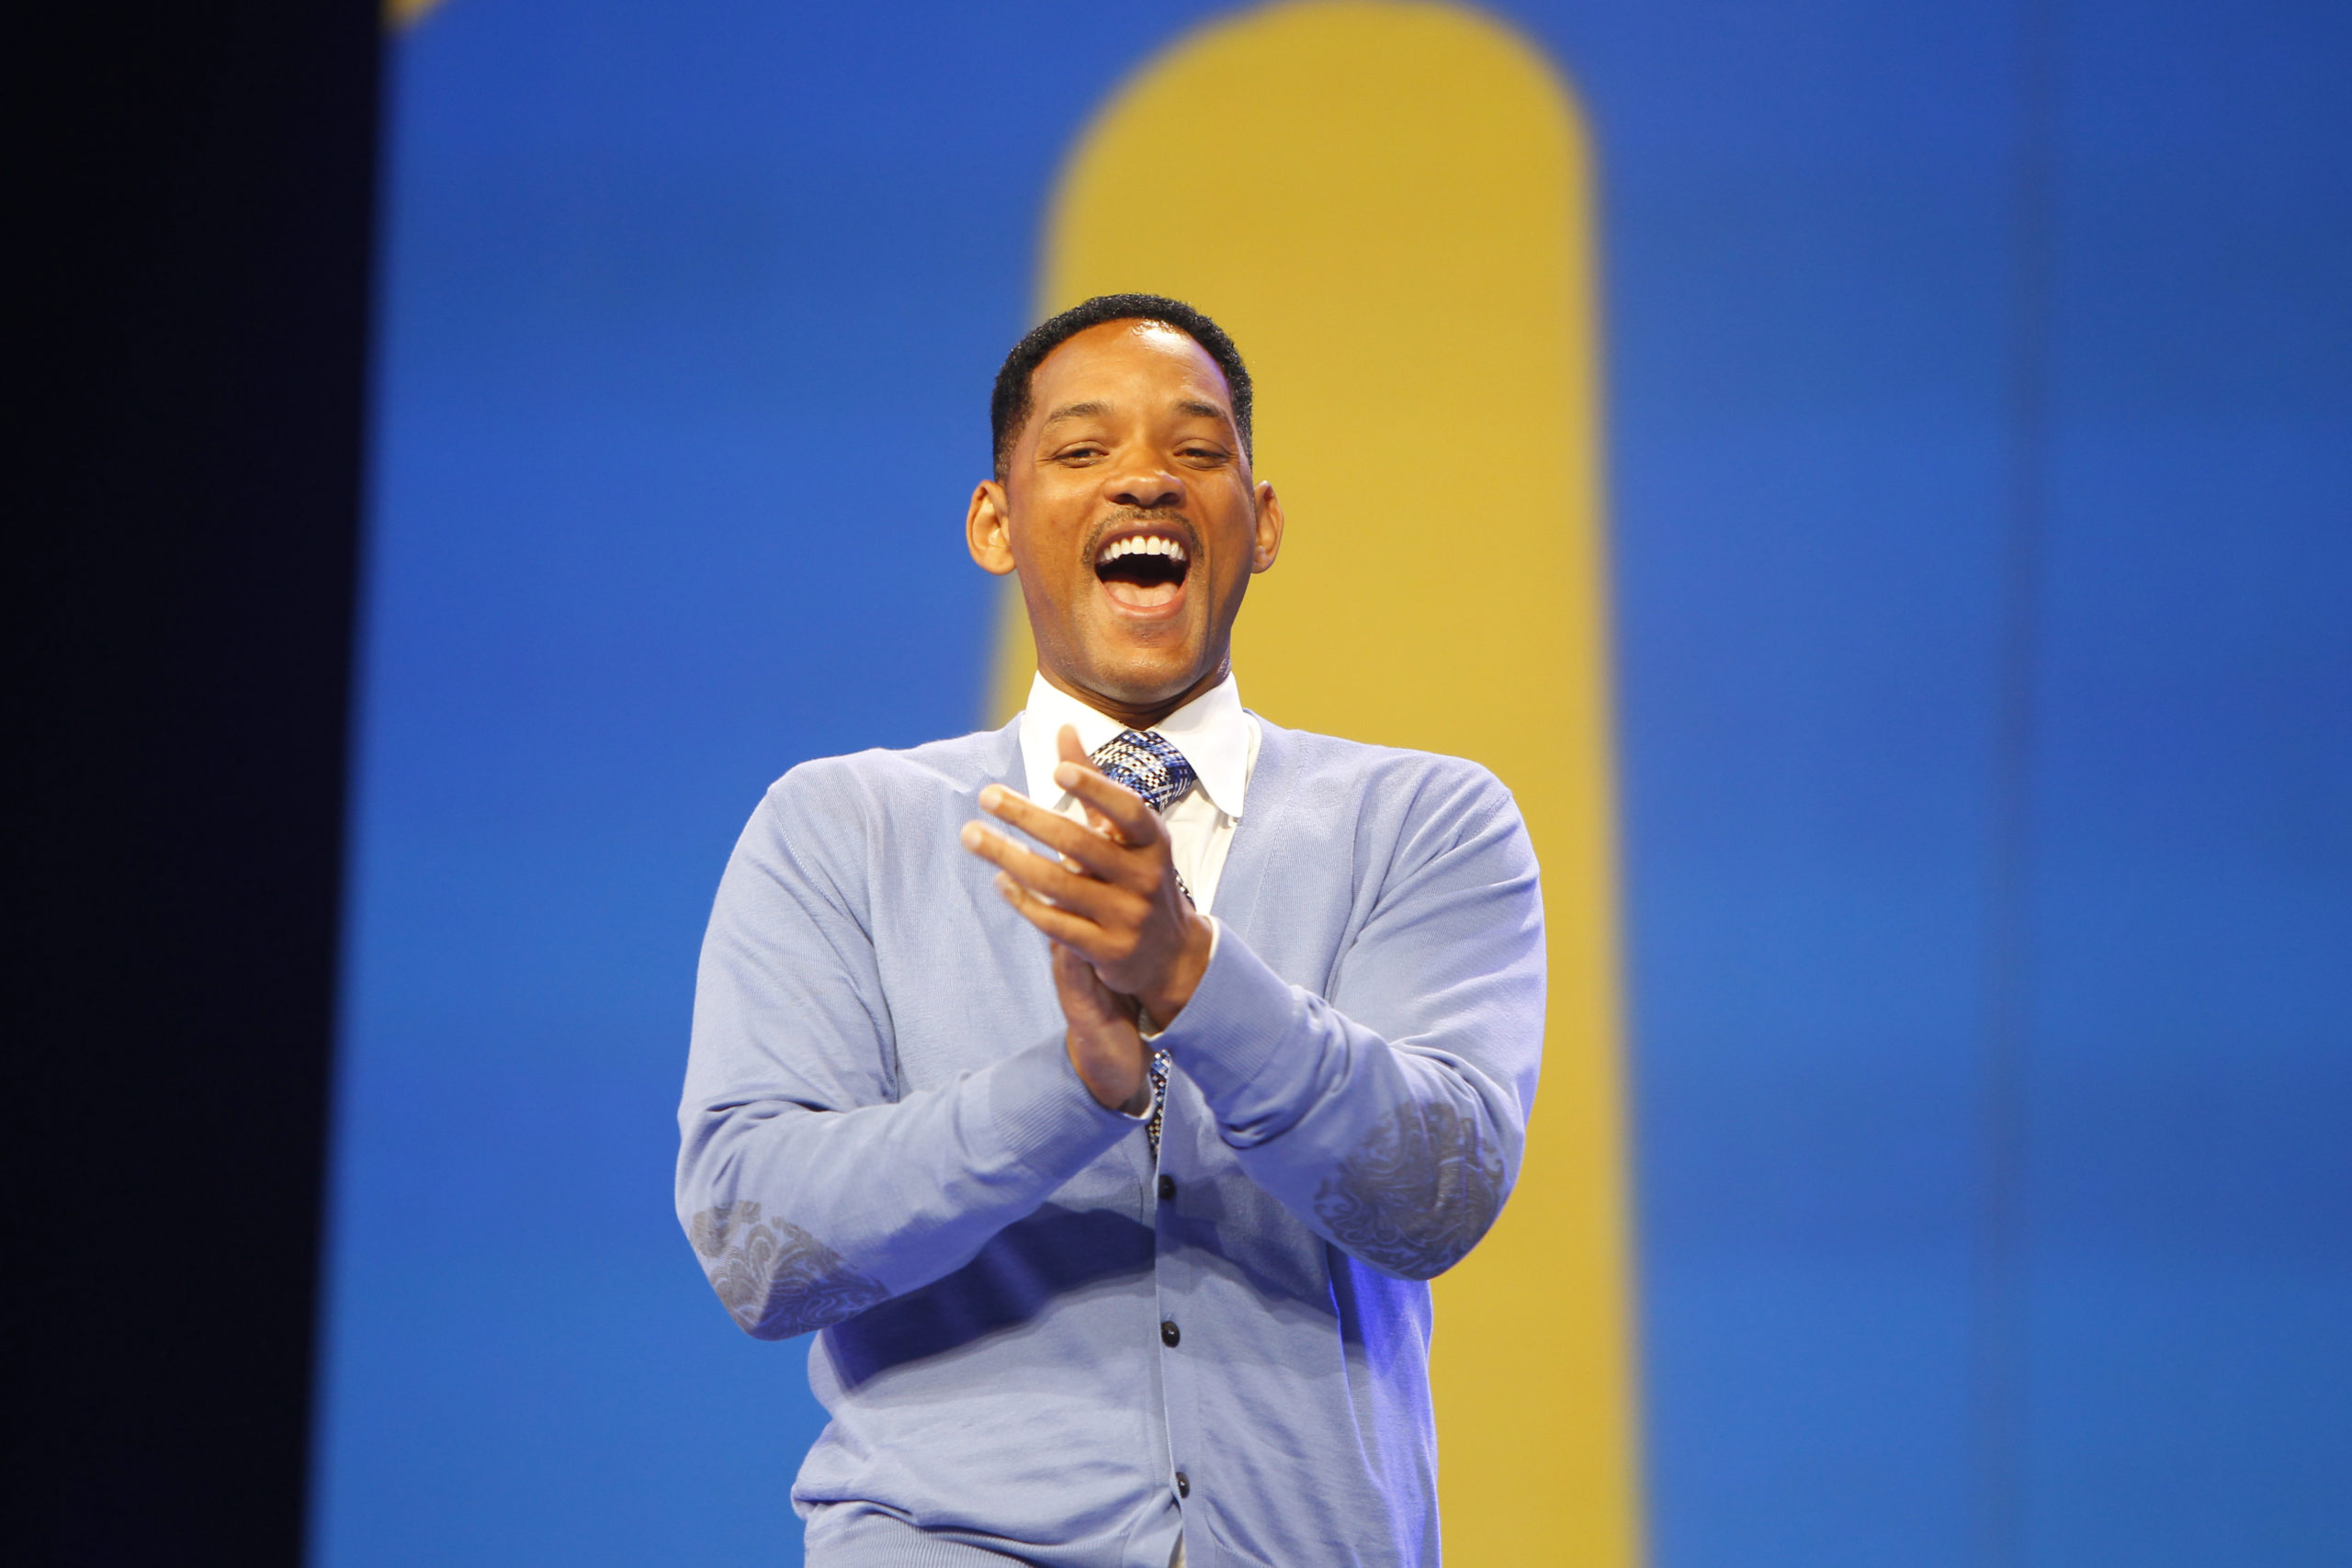 Will Smith is standing in front of a blue and yellow wall.